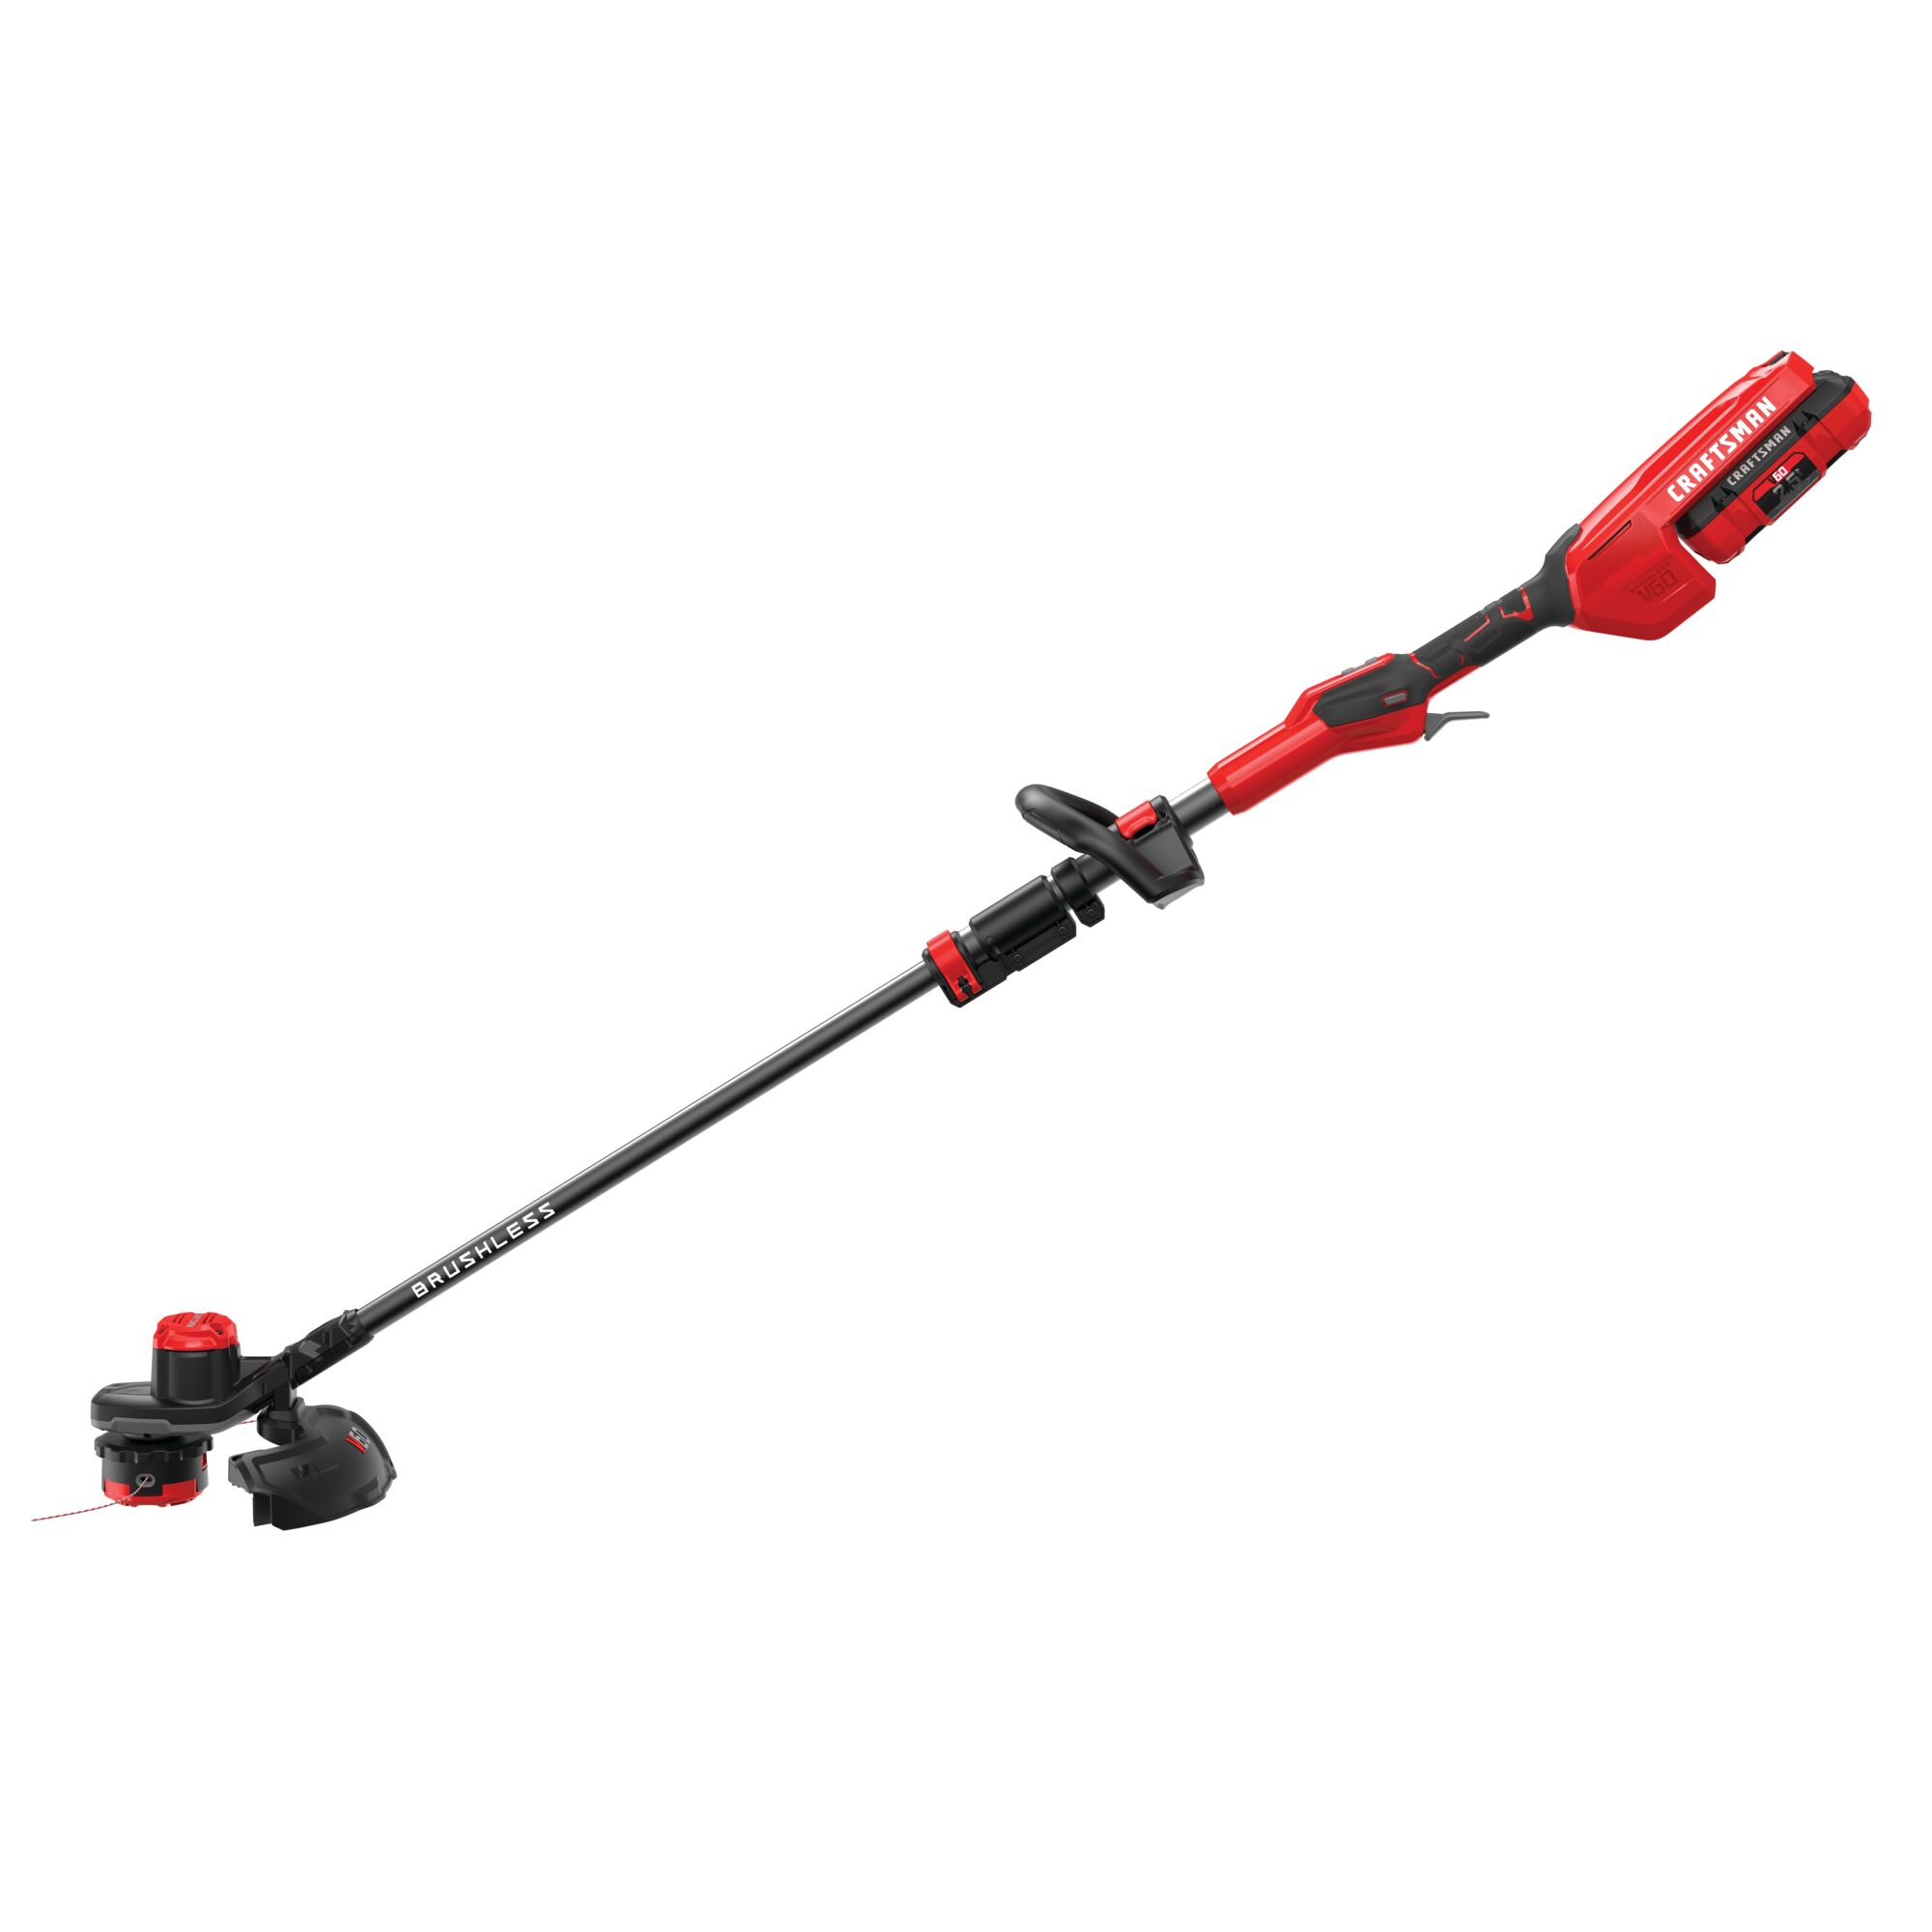 60 volt cordless 15 inch brushless weedwacker string trimmer with quickwind kit 2.5 ampere per hour.